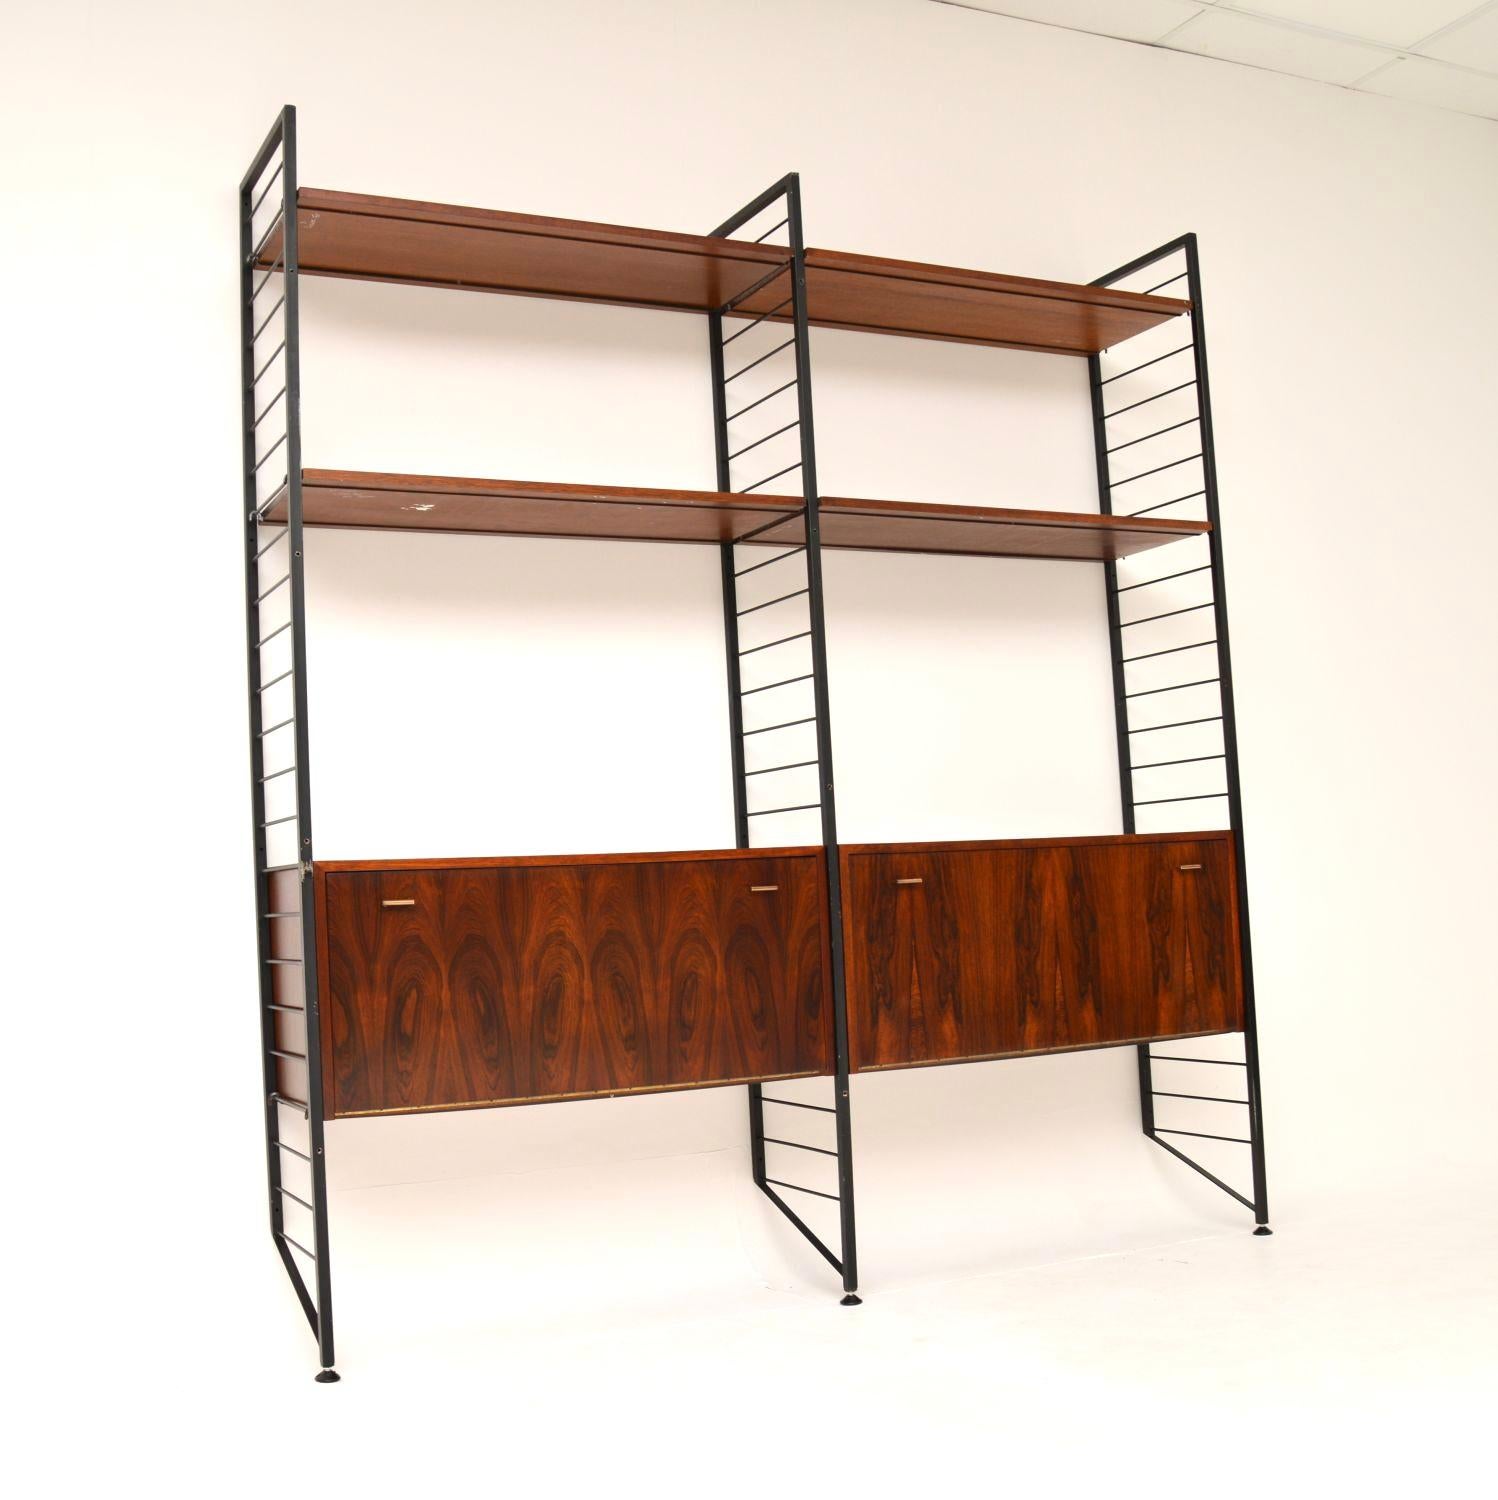 A stylish and very rare vintage ladderax wall unit in wood. This was made by Staples in England, it dates from the 1960’s.

It is very unusual to find these in wood, they are much more commonly seen in teak. The three rails lean against the wall